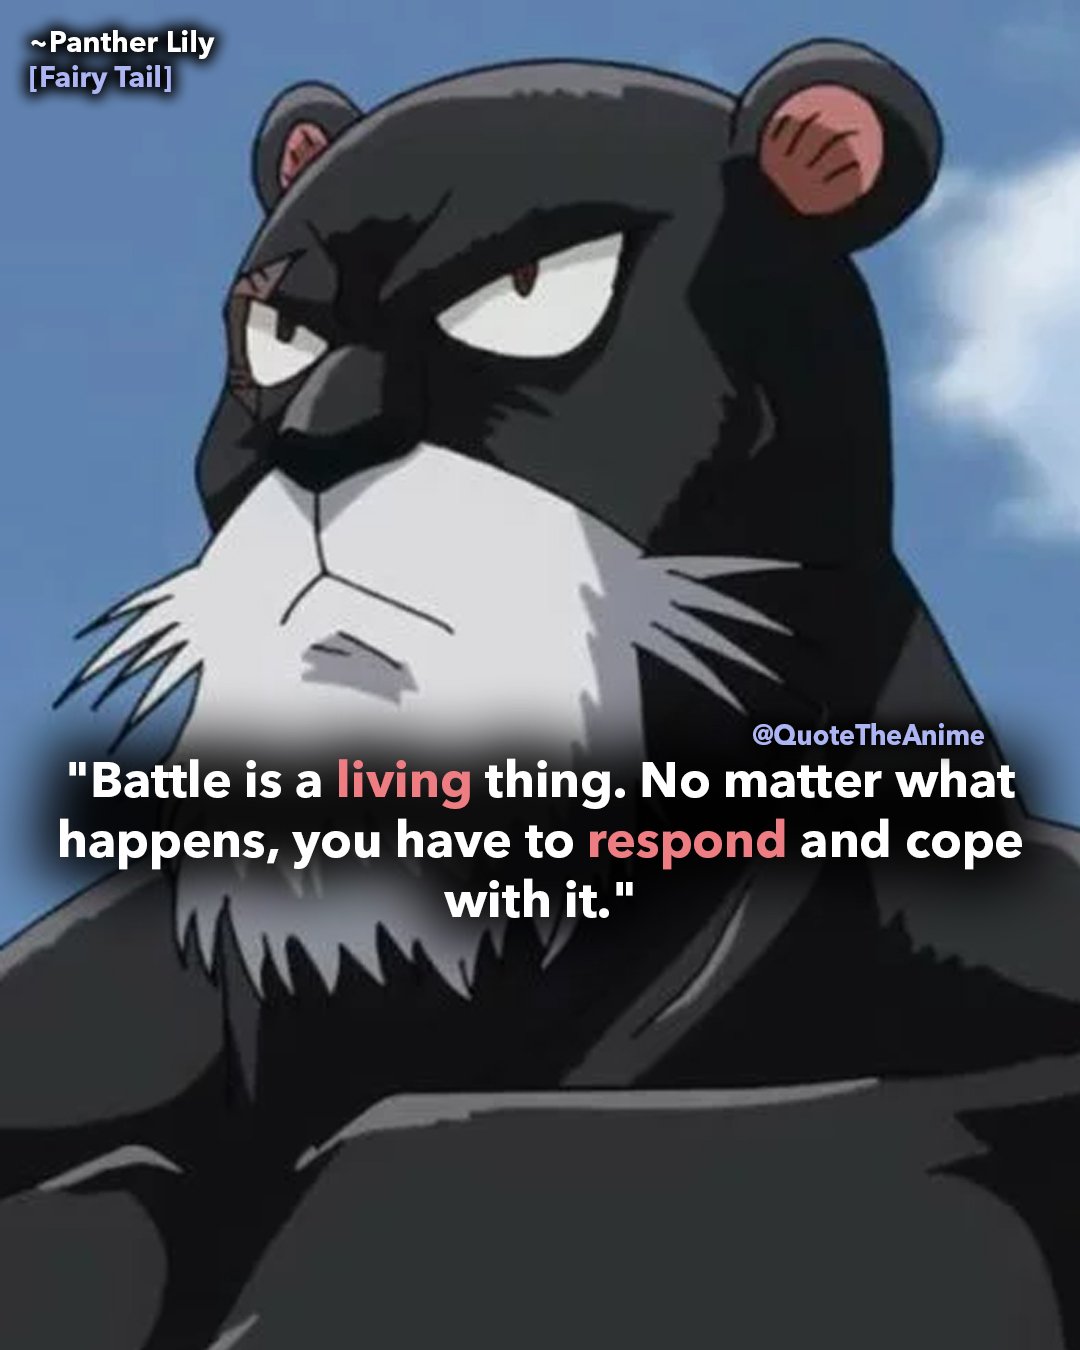 Quote The Anime в Twitter: „fairy tail quotes - panther lily quote - battle  is a living thing. you have to respond and cope with it  /HDQrGFoZAz ______ /e7fCXXn8KY“ / Twitter